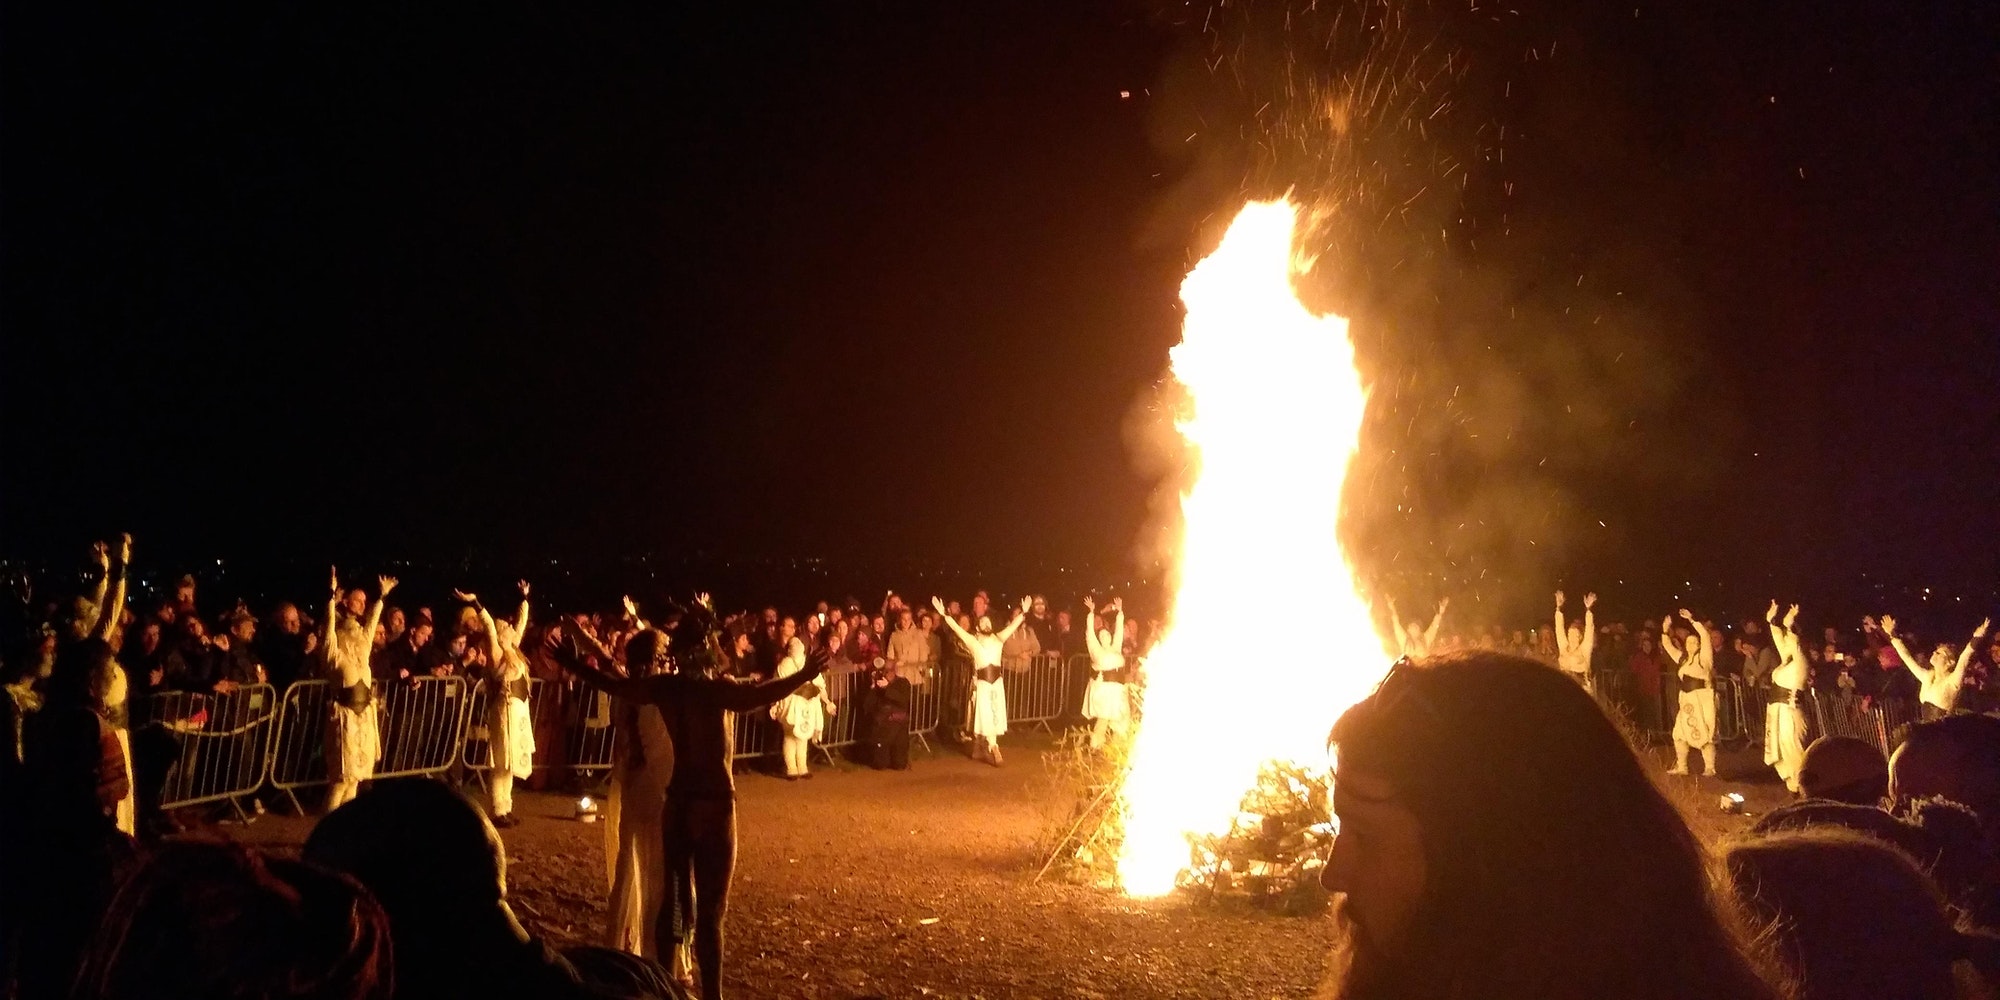 Bonfire at the Beltane Fire Festival 2019, Calton Hill, Edinburgh. The reunited May Queen and Green Man face the fire, while dancers stop to raise their arms to heaven. Photo by "Nyri0" This file is licensed under the Creative Commons Attribution-Share Alike 4.0 International license.